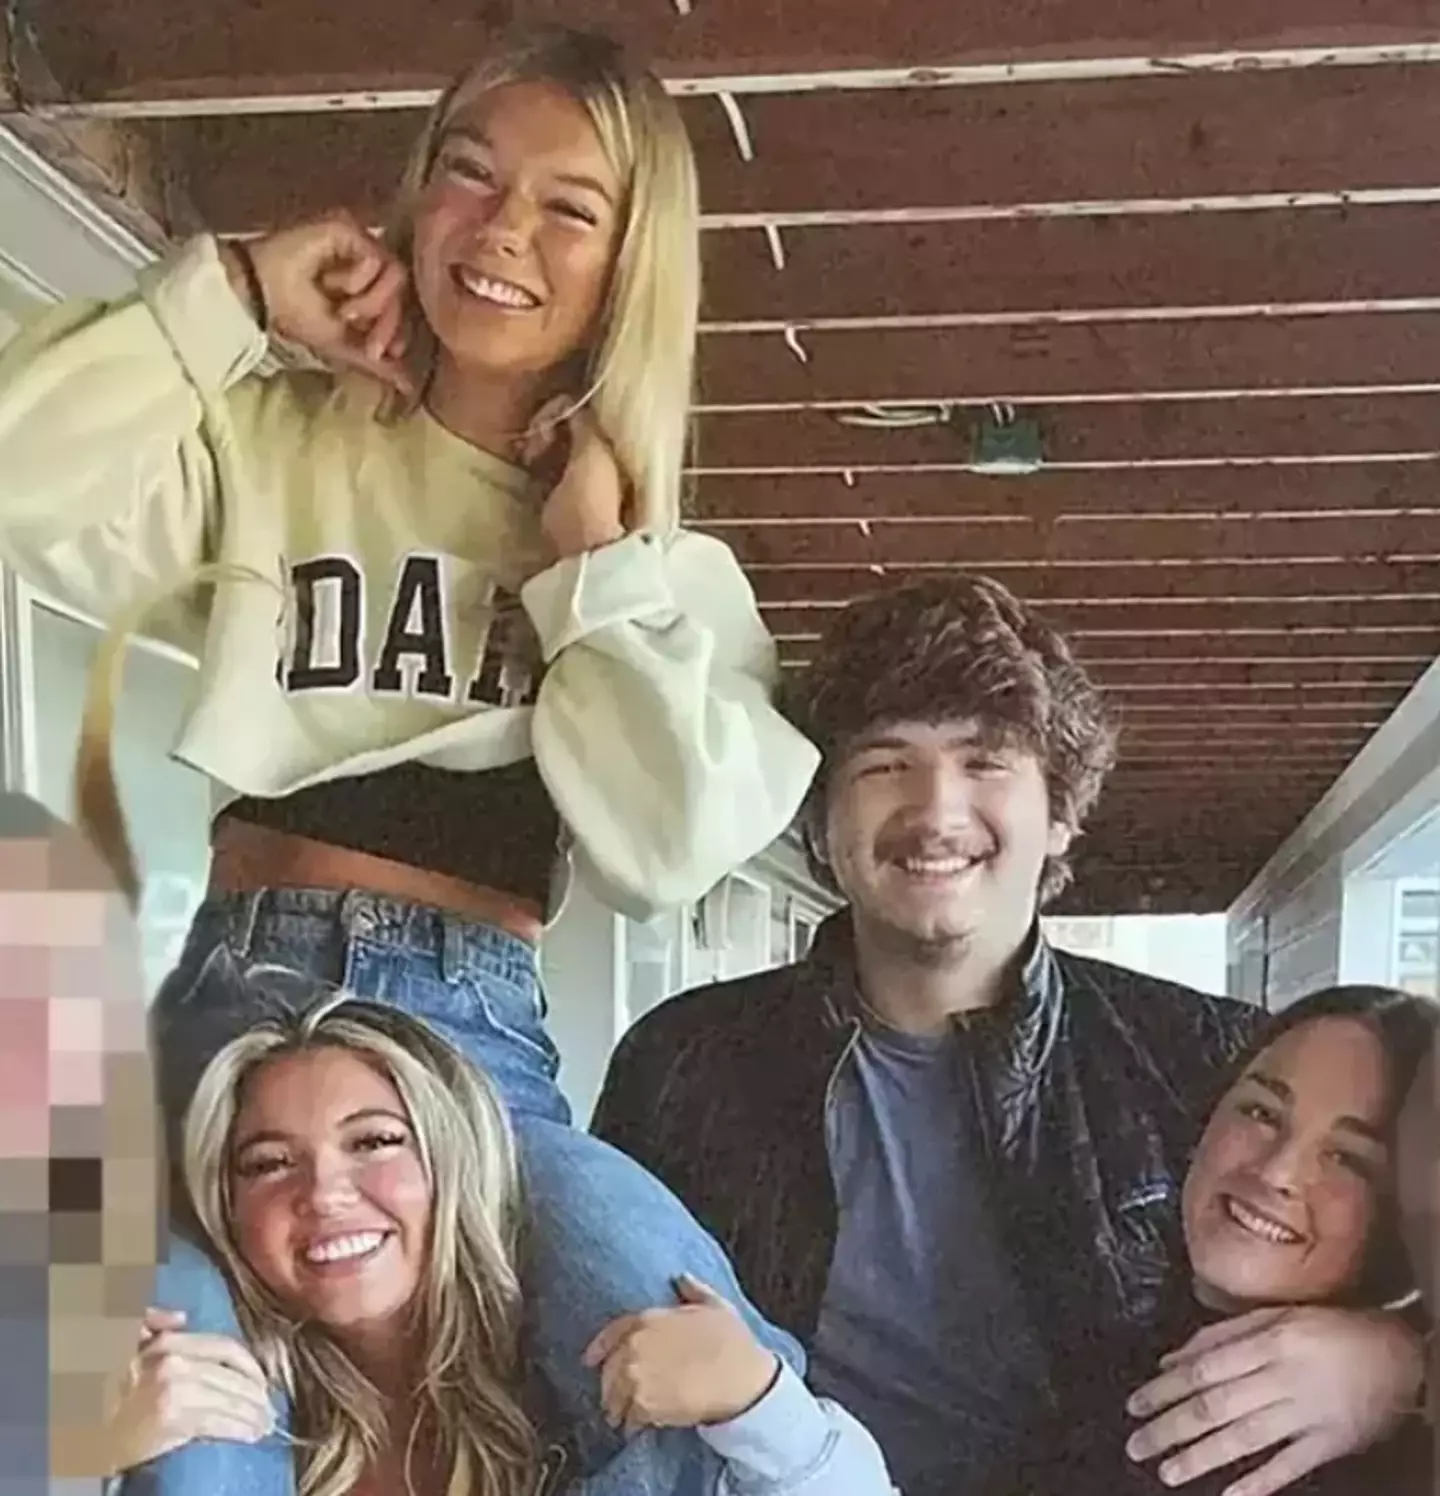 The four Idaho students were found dead in their home.